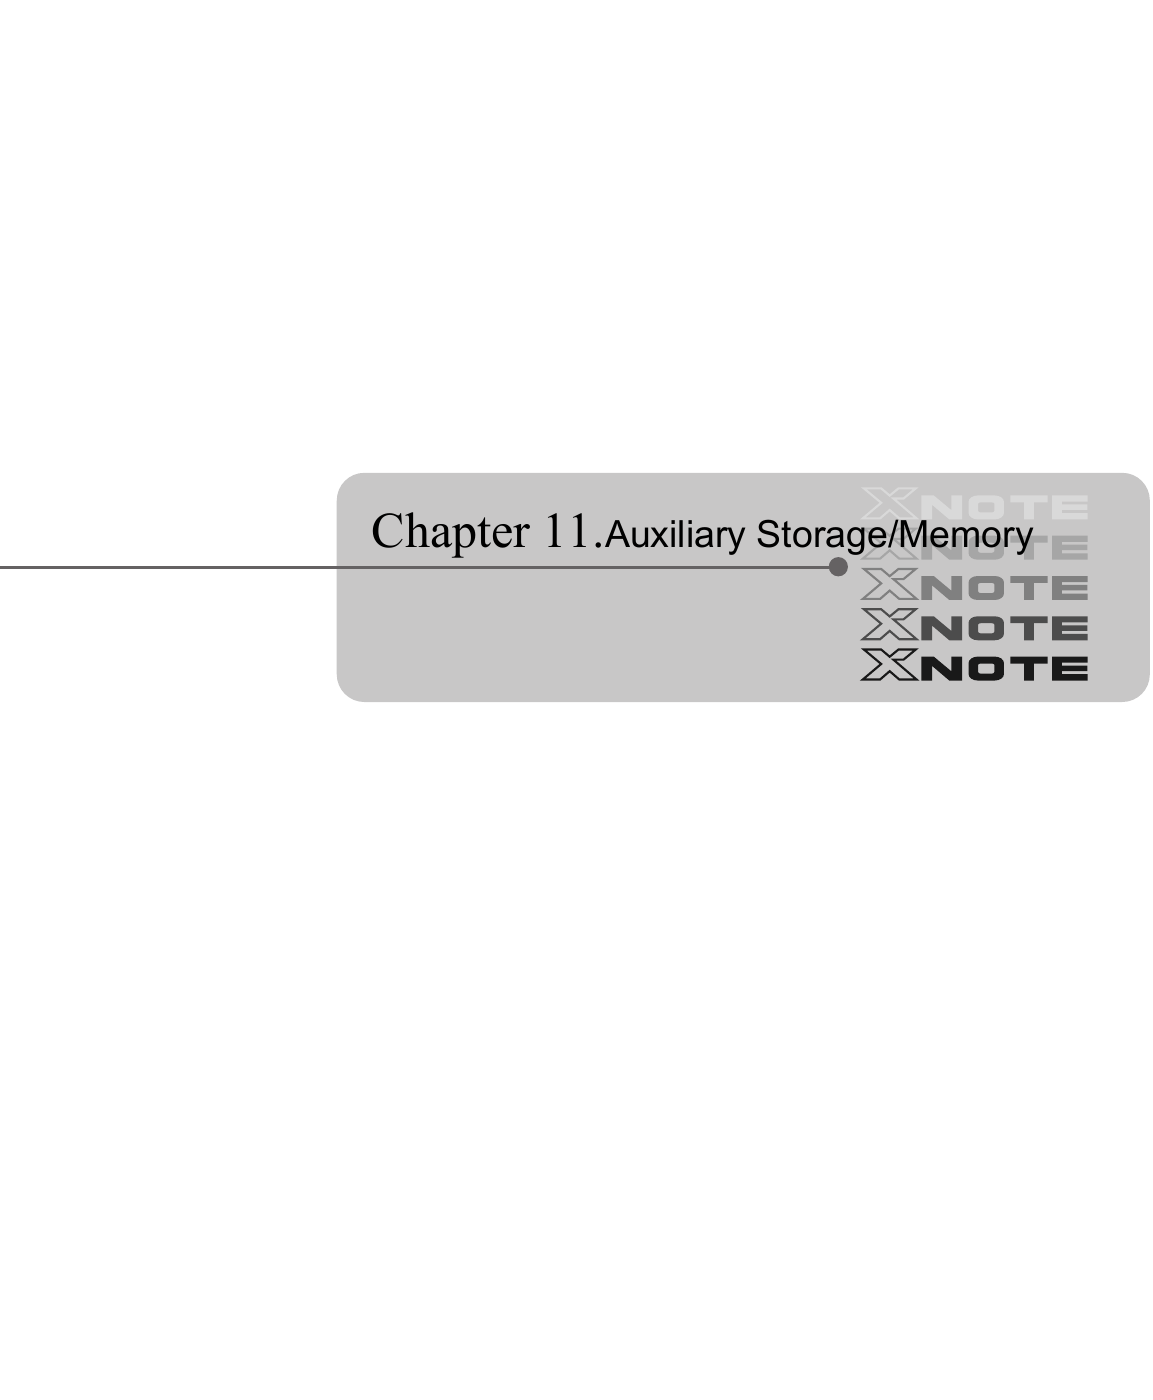  Chapter 11.Auxiliary Storage/Memory